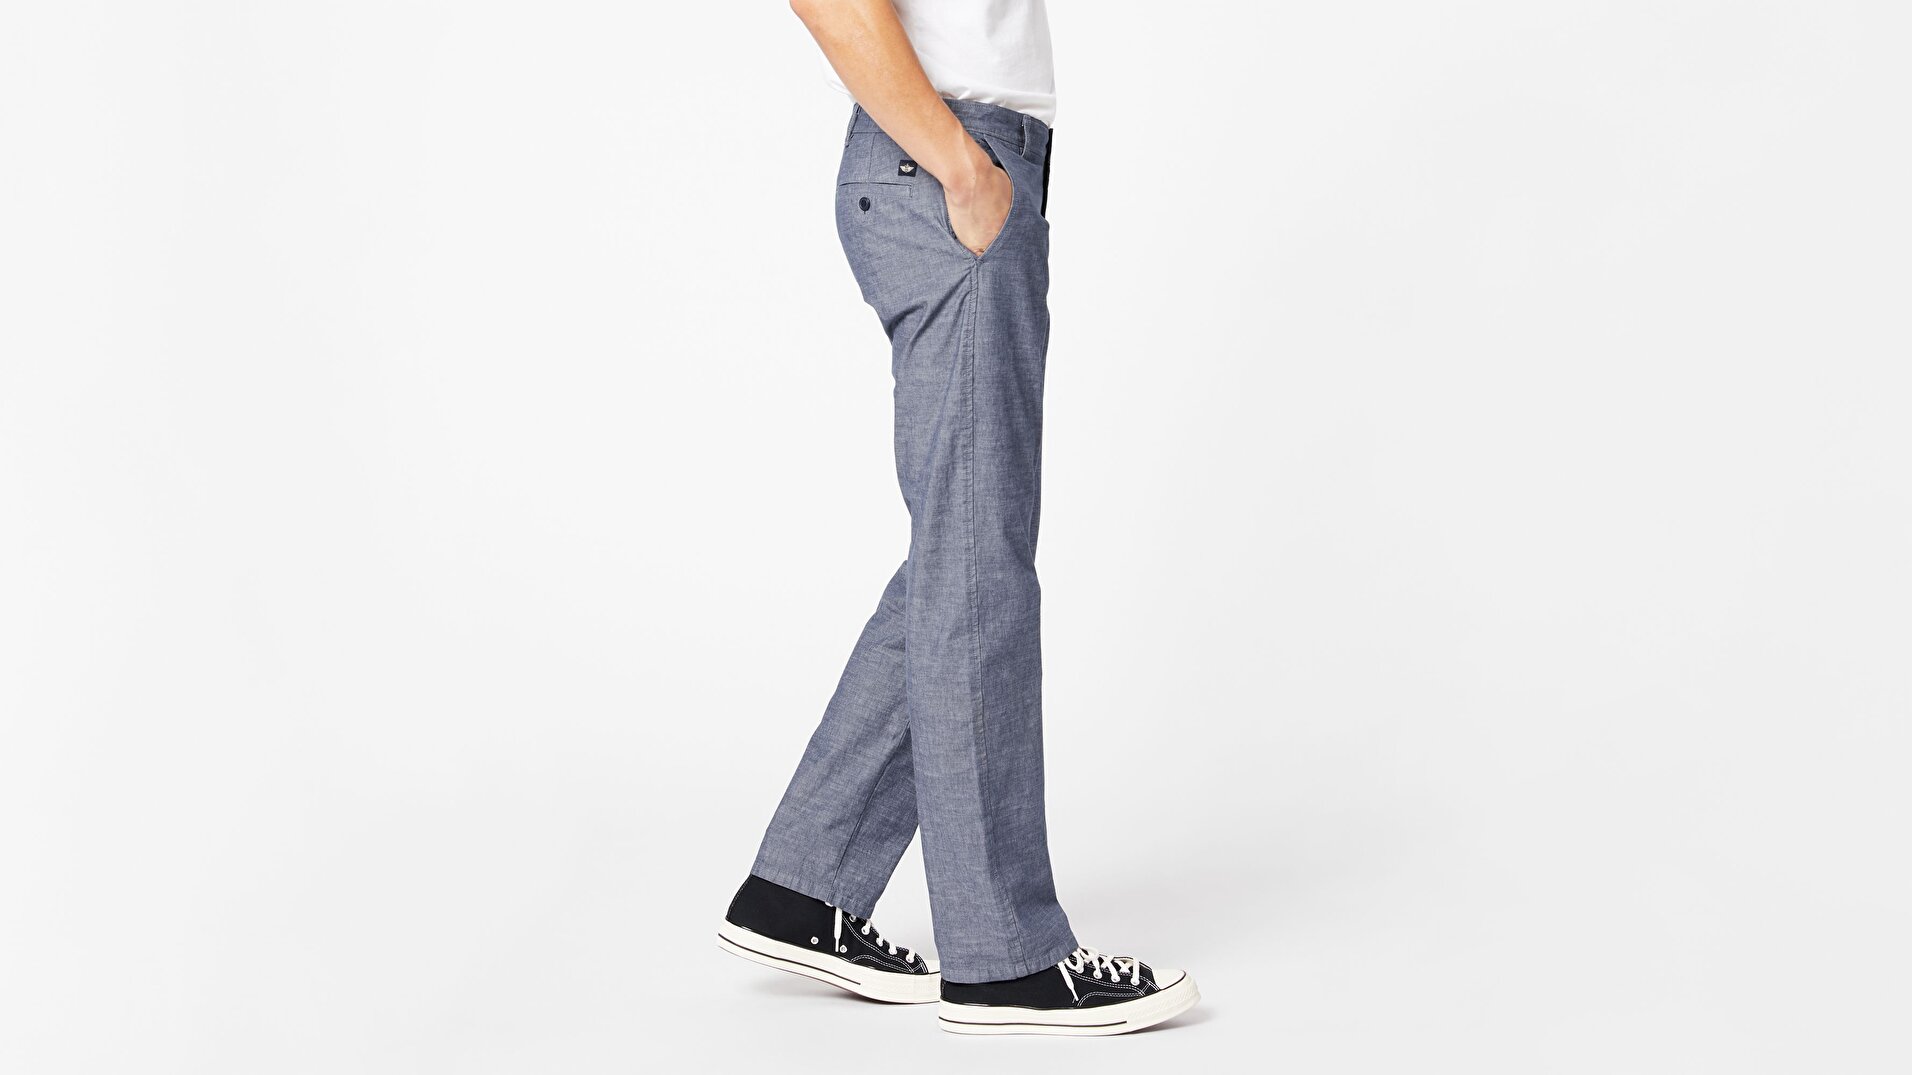 Ultimate Chino, Straight Fit